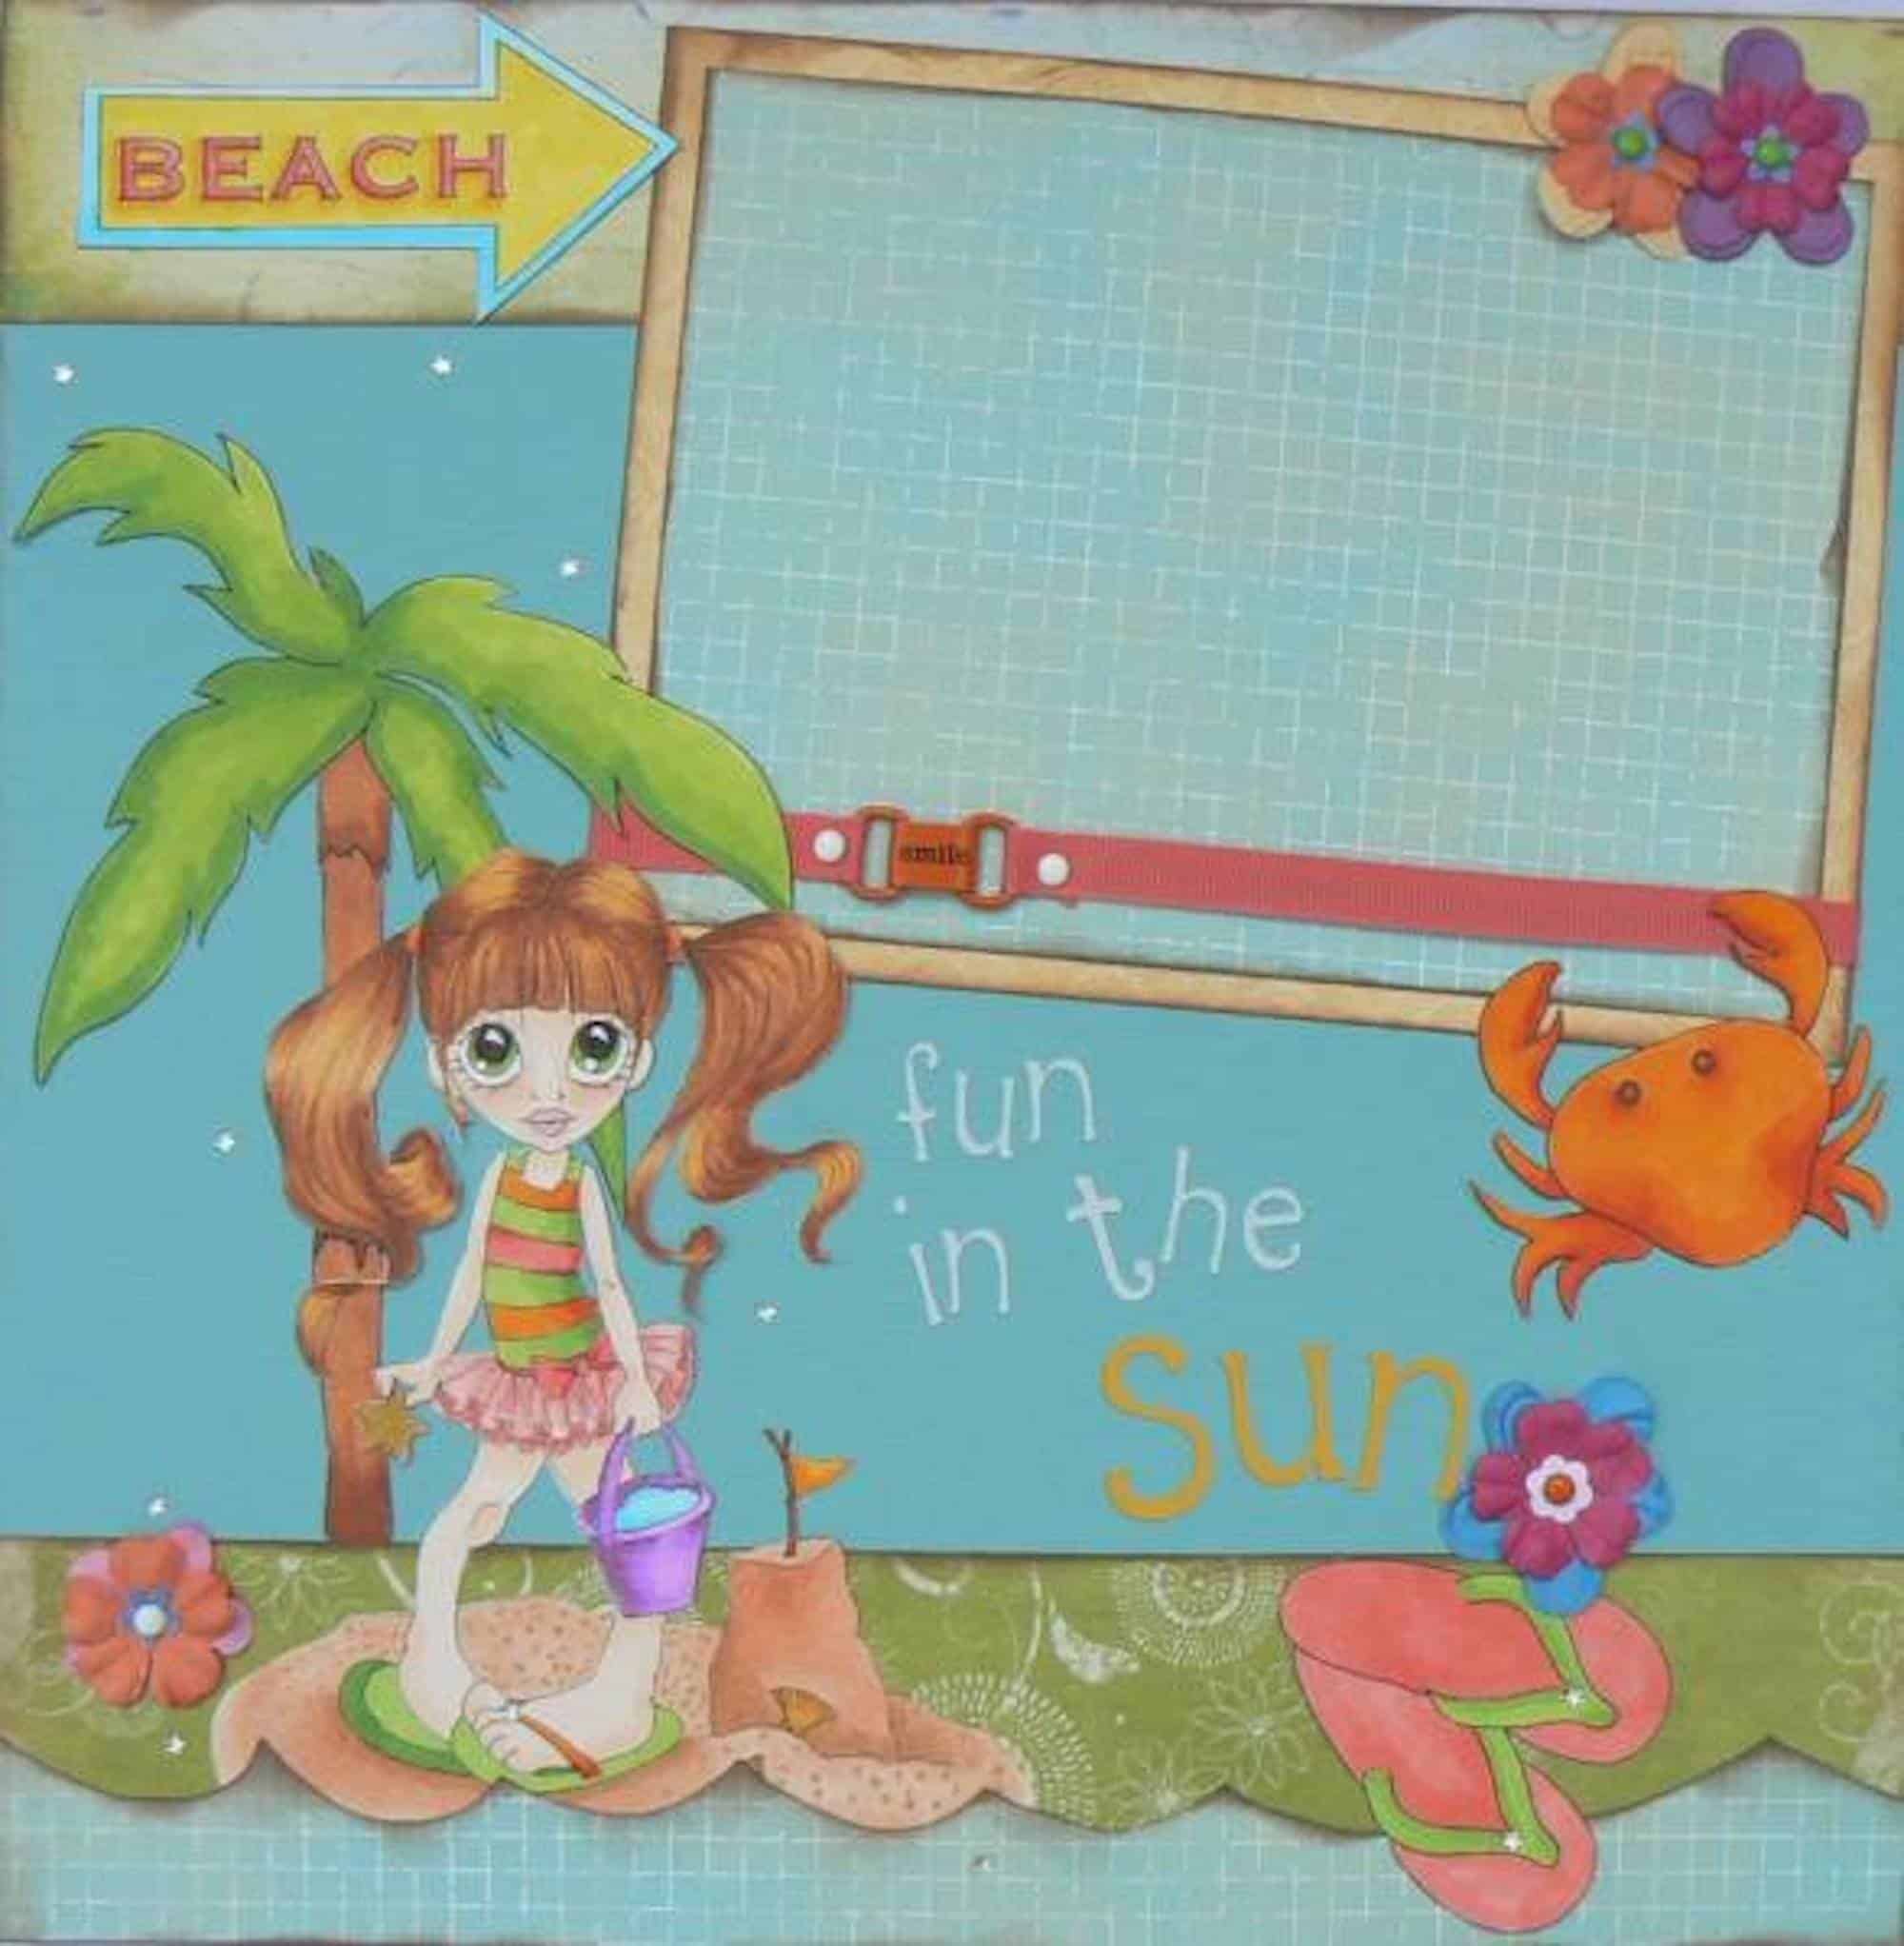 fun in the sun scrapbook page for beach photos with stamped and colored images